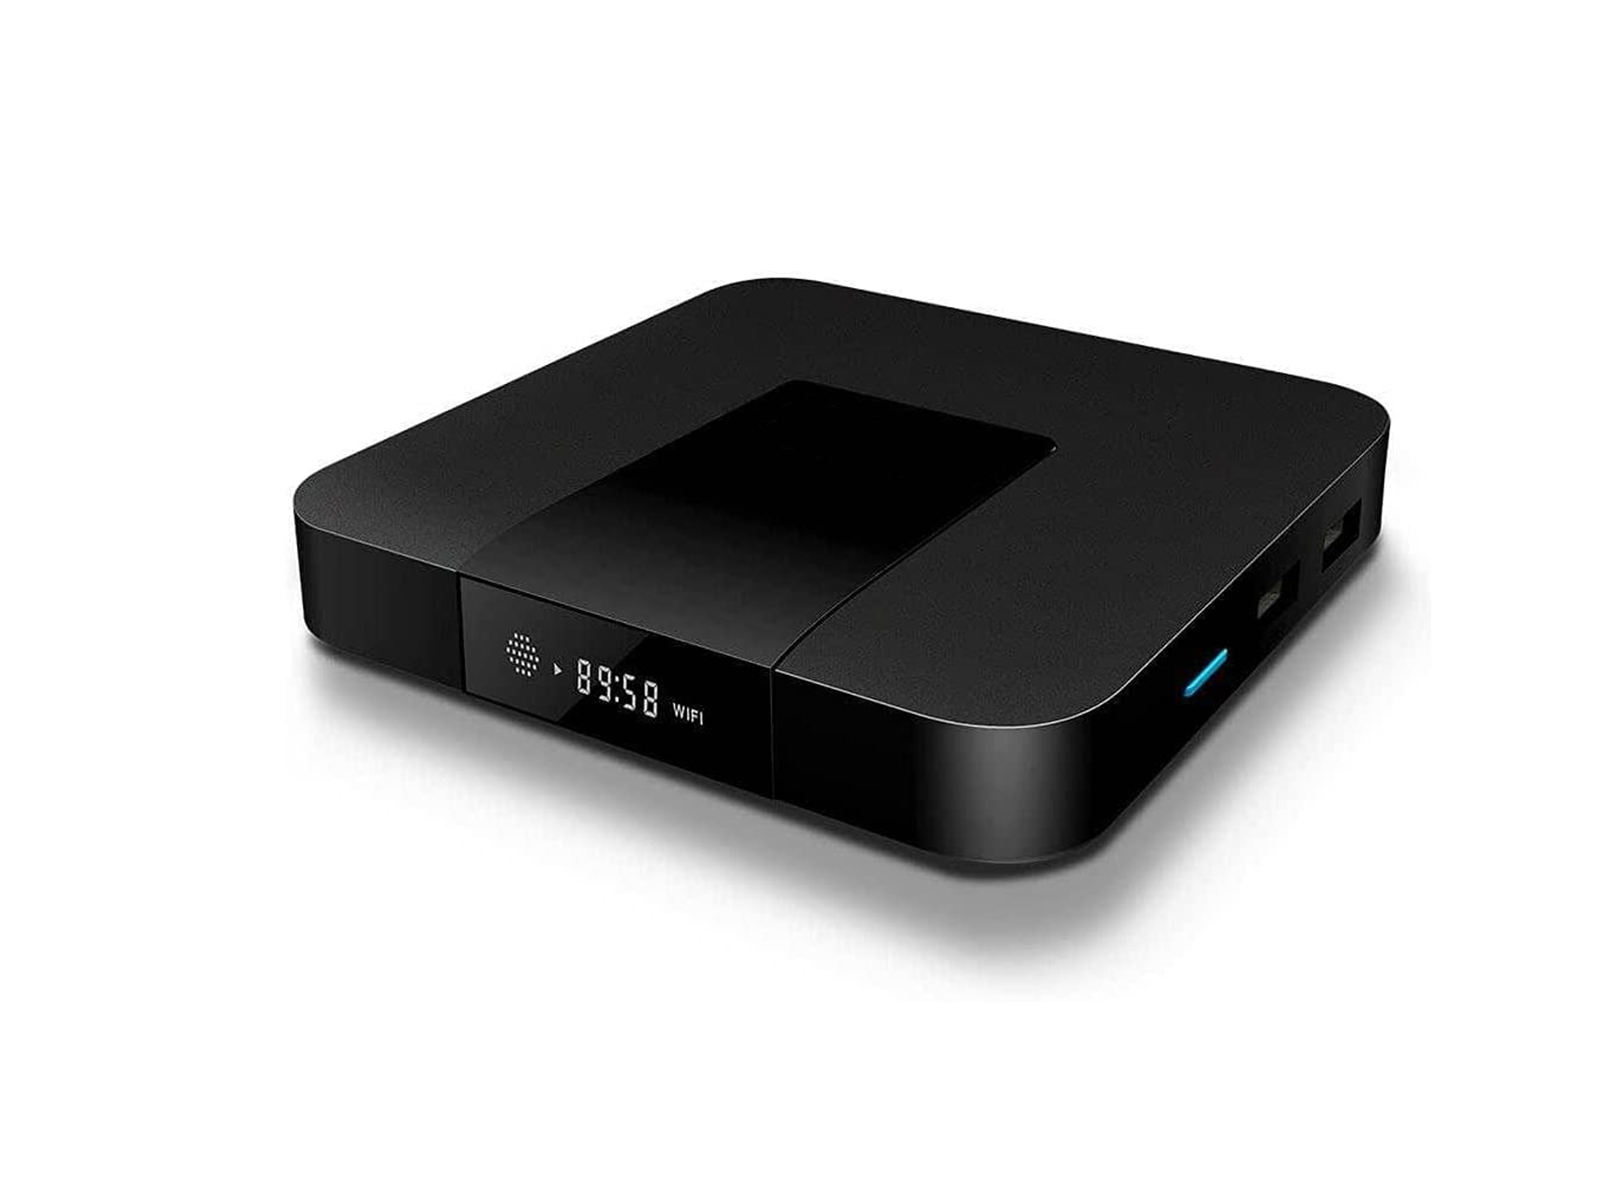 SWEDX TX3 Android Box 4K 60 Hz 4/32 GB